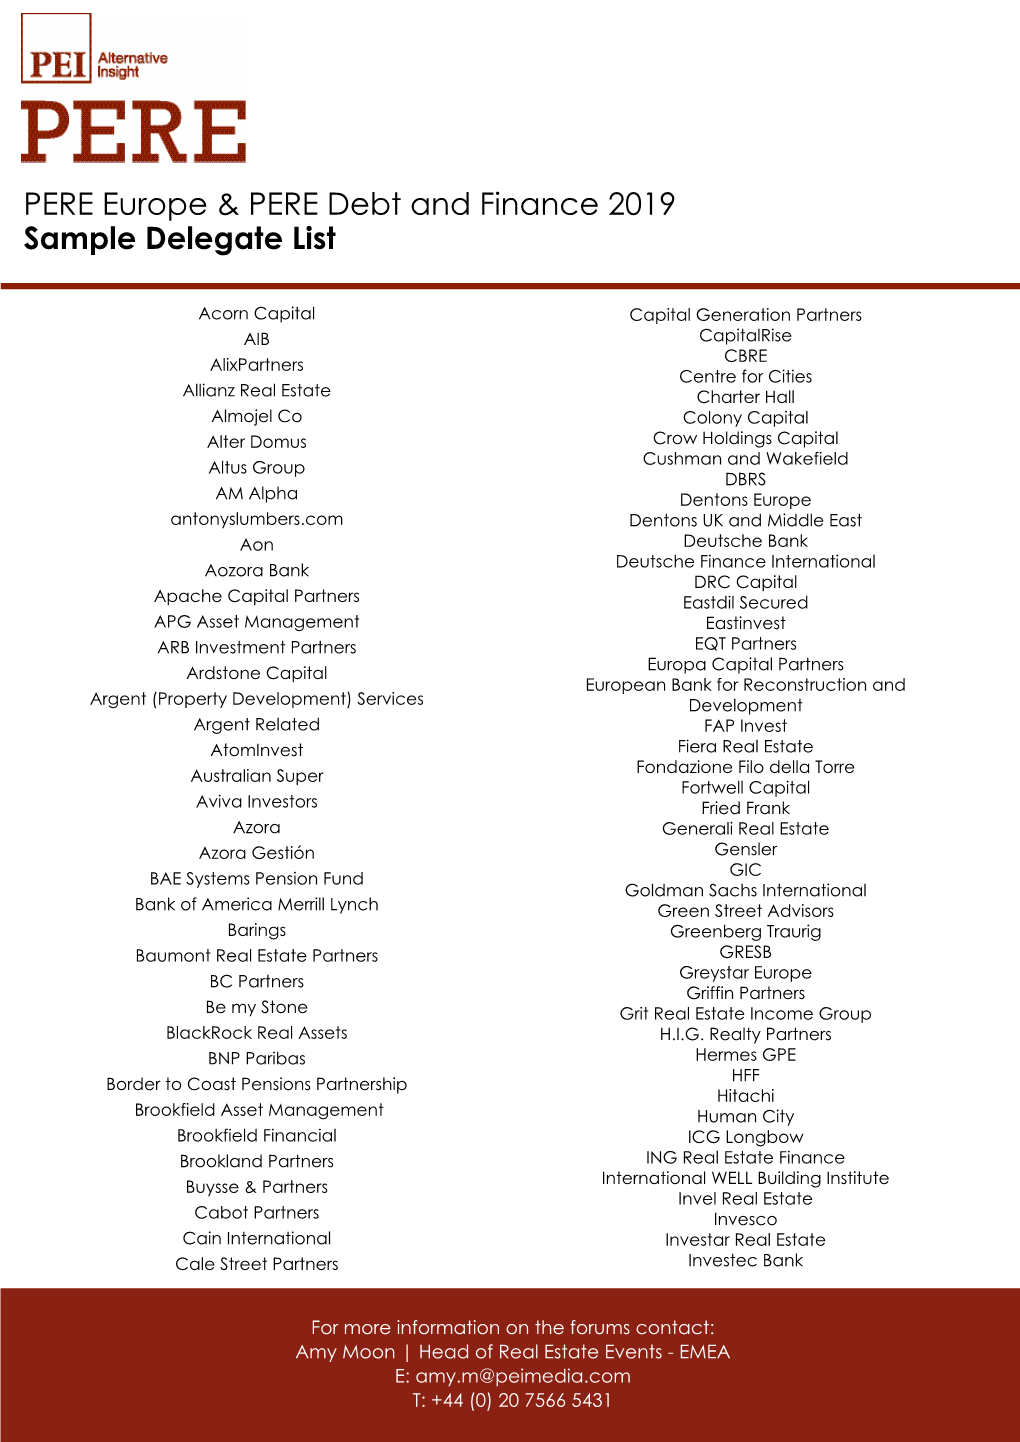 PERE Europe & PERE Debt and Finance 2019 Sample Delegate List